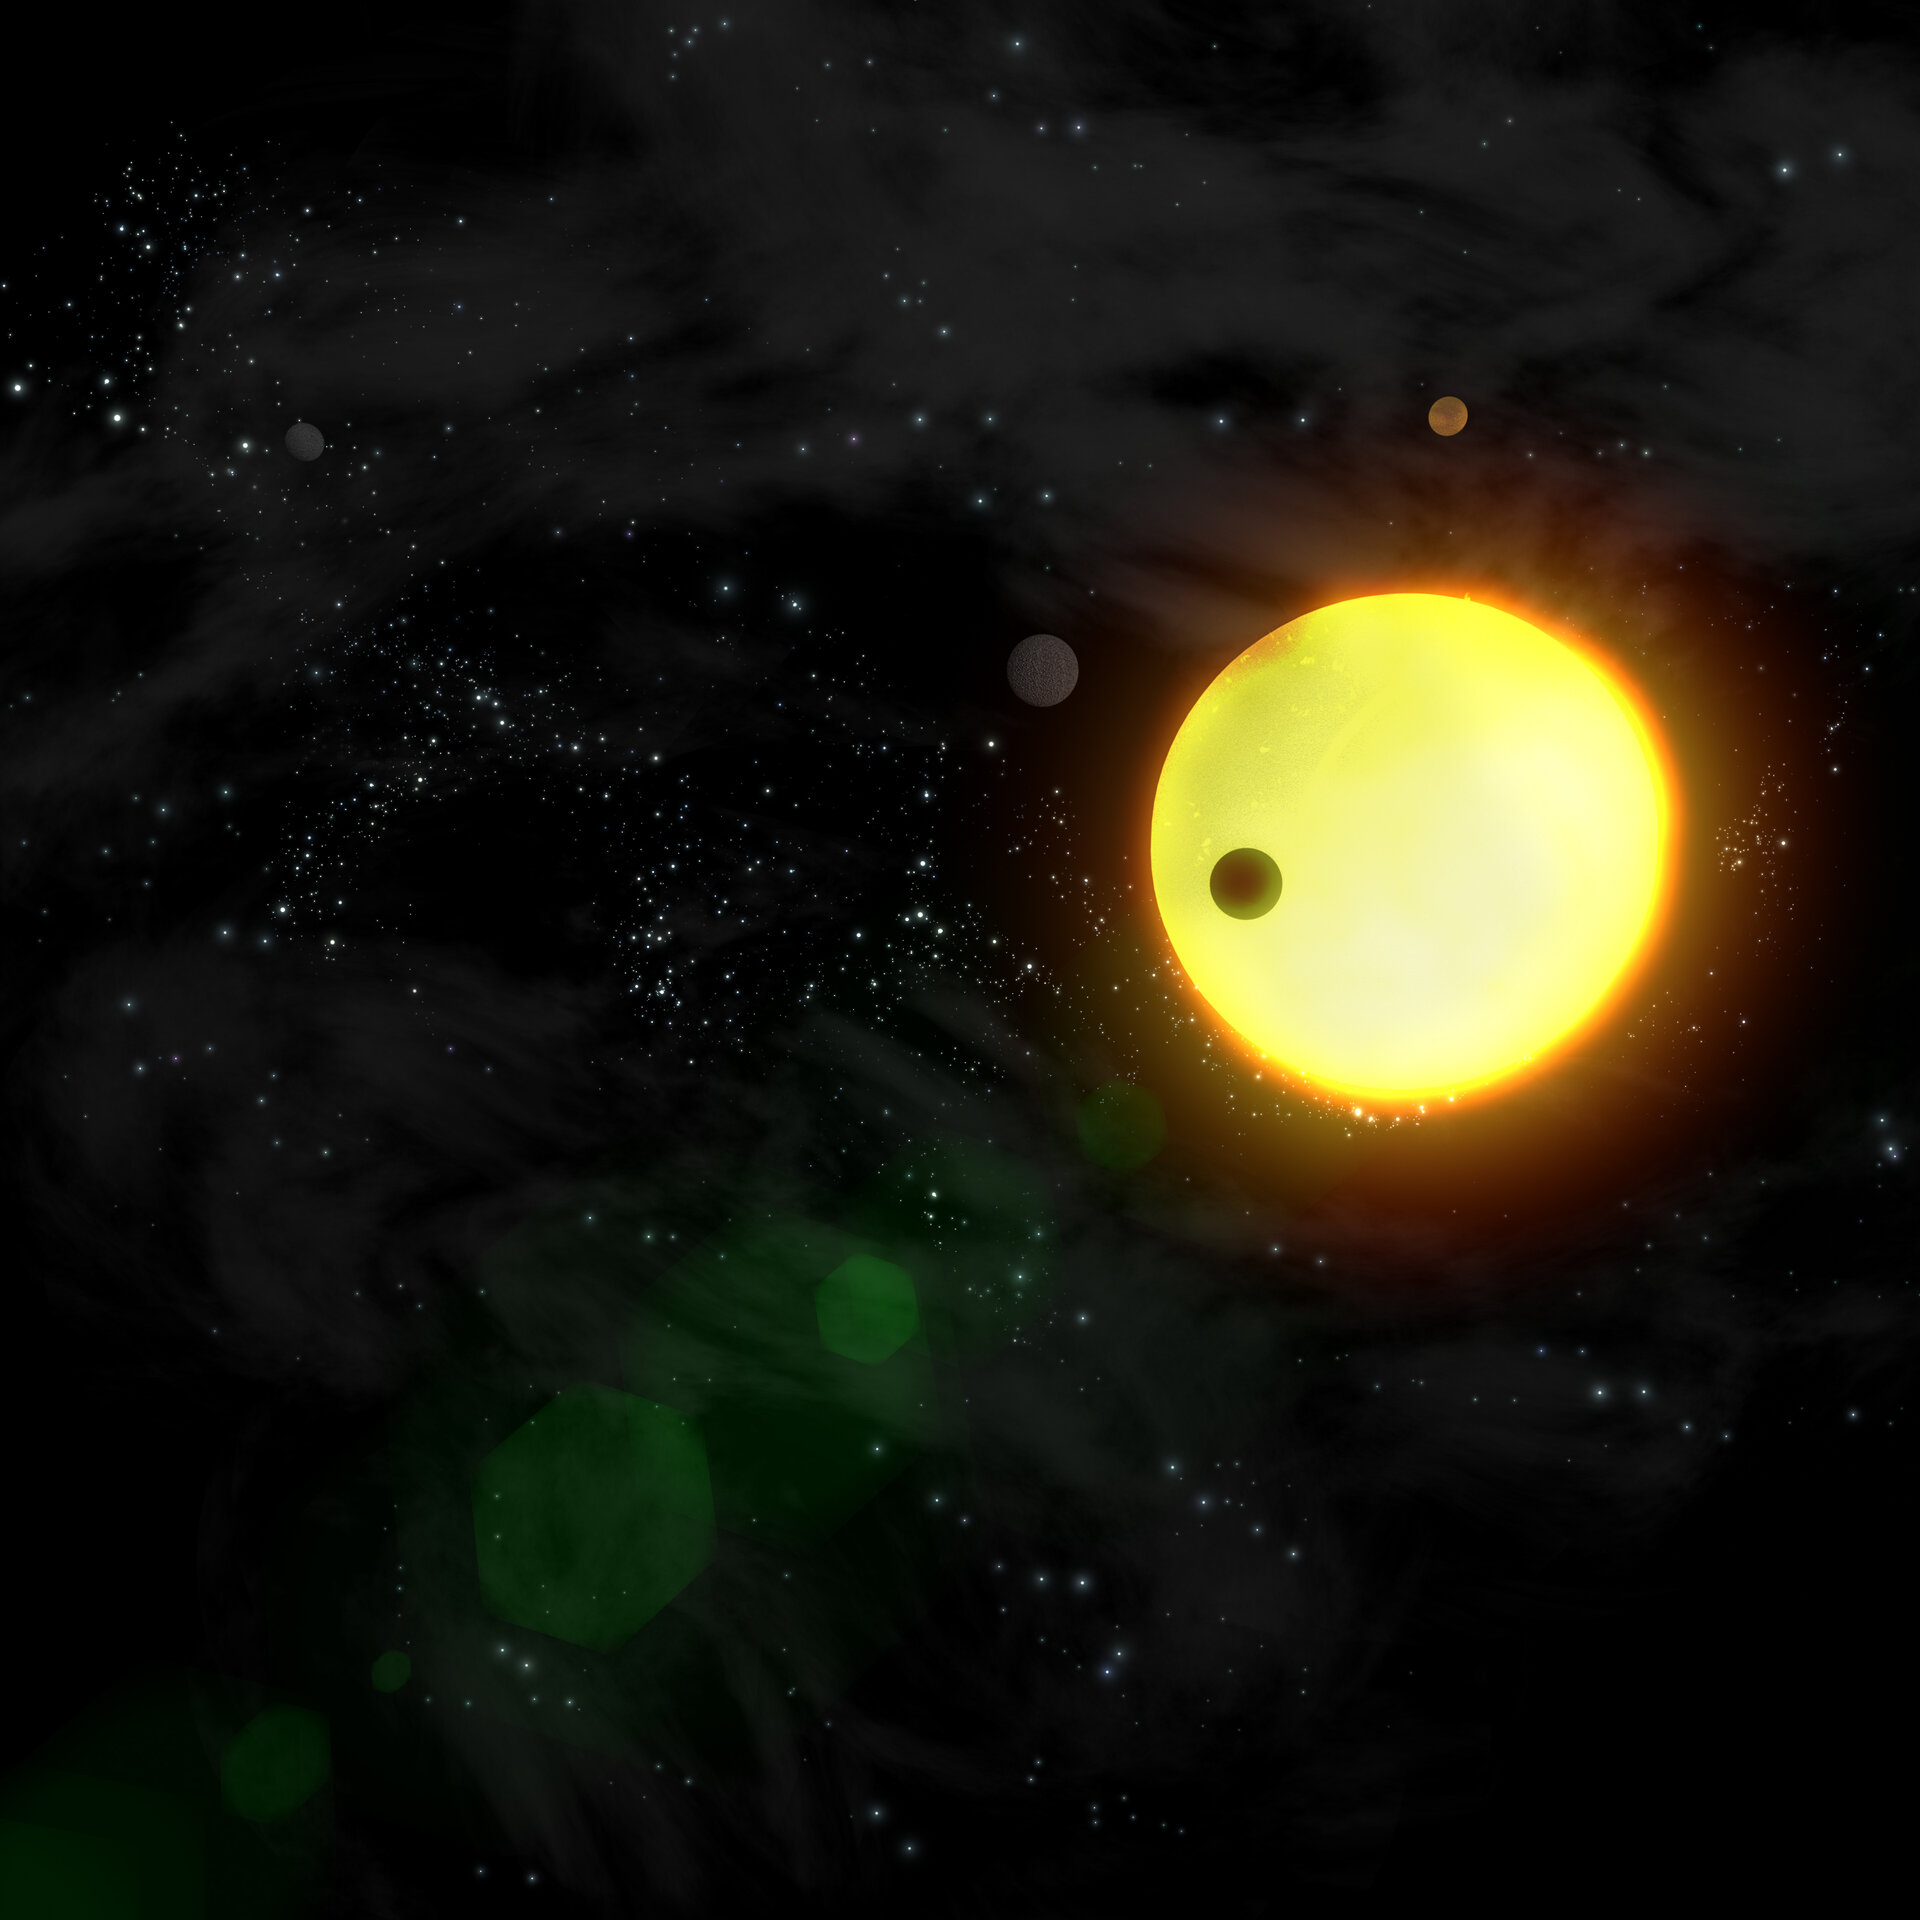 Artist's impression of extrasolar planets orbiting another sun